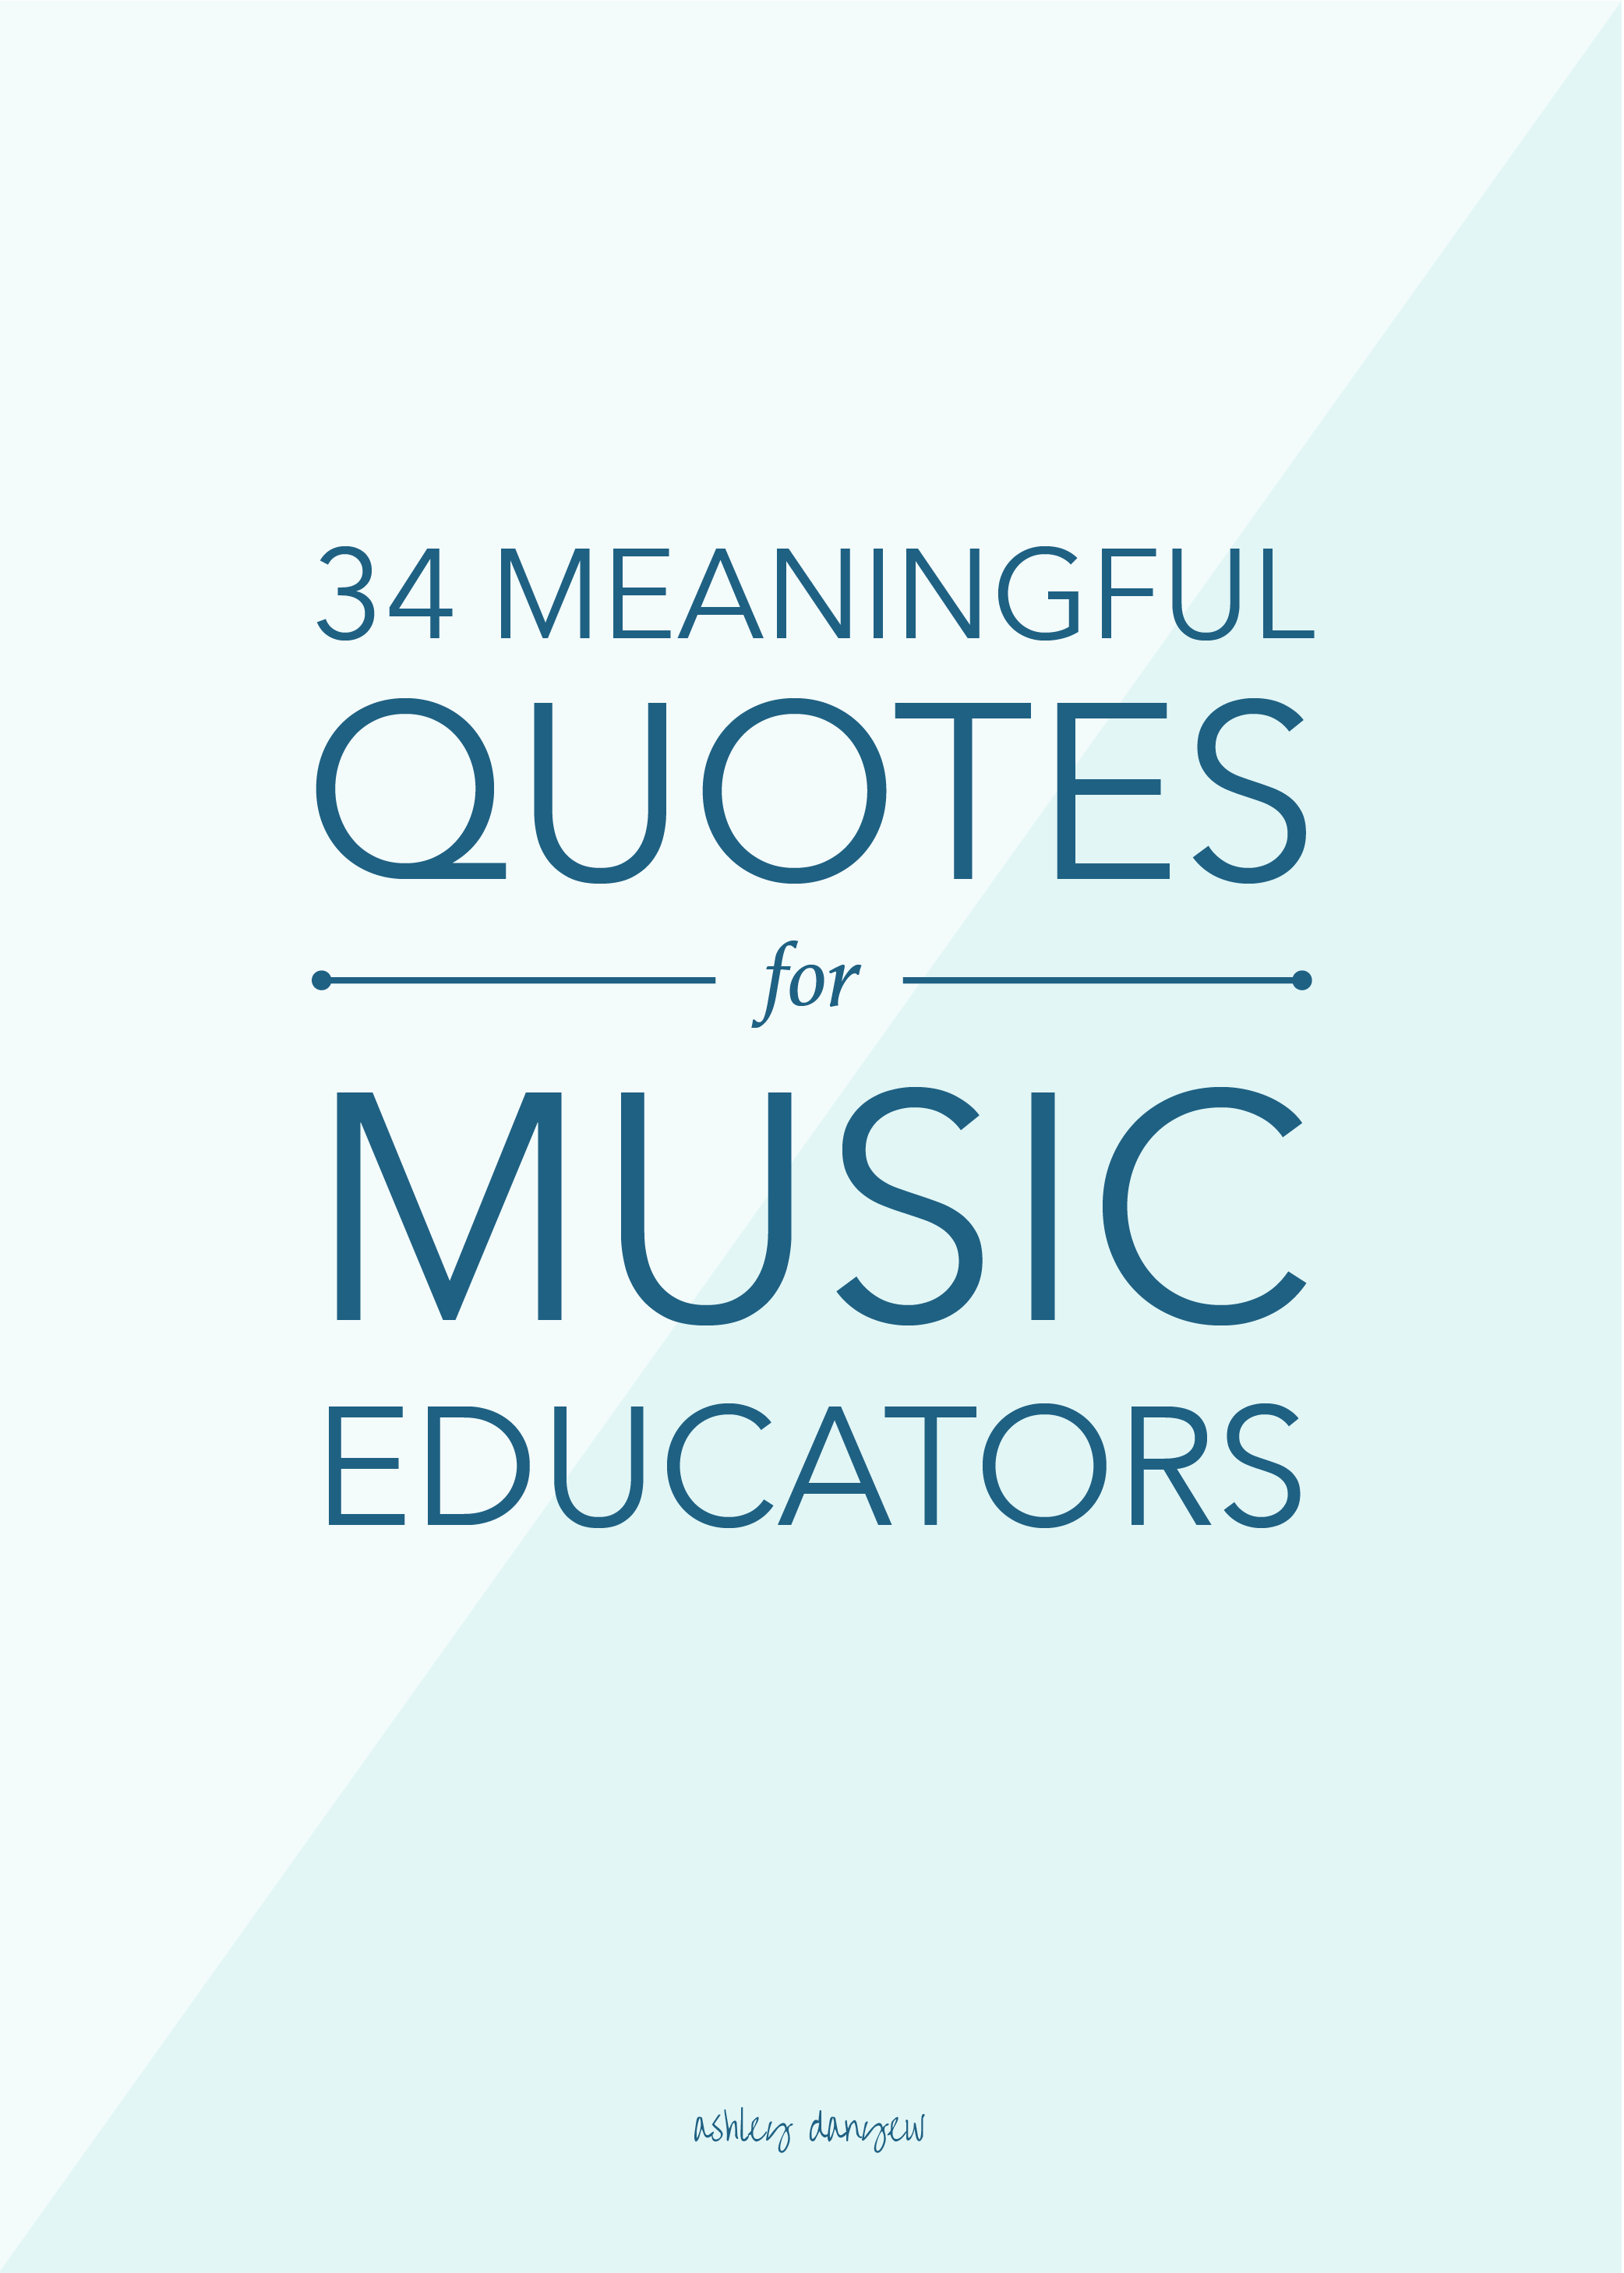 34 Meaningful Quotes for Music Educators